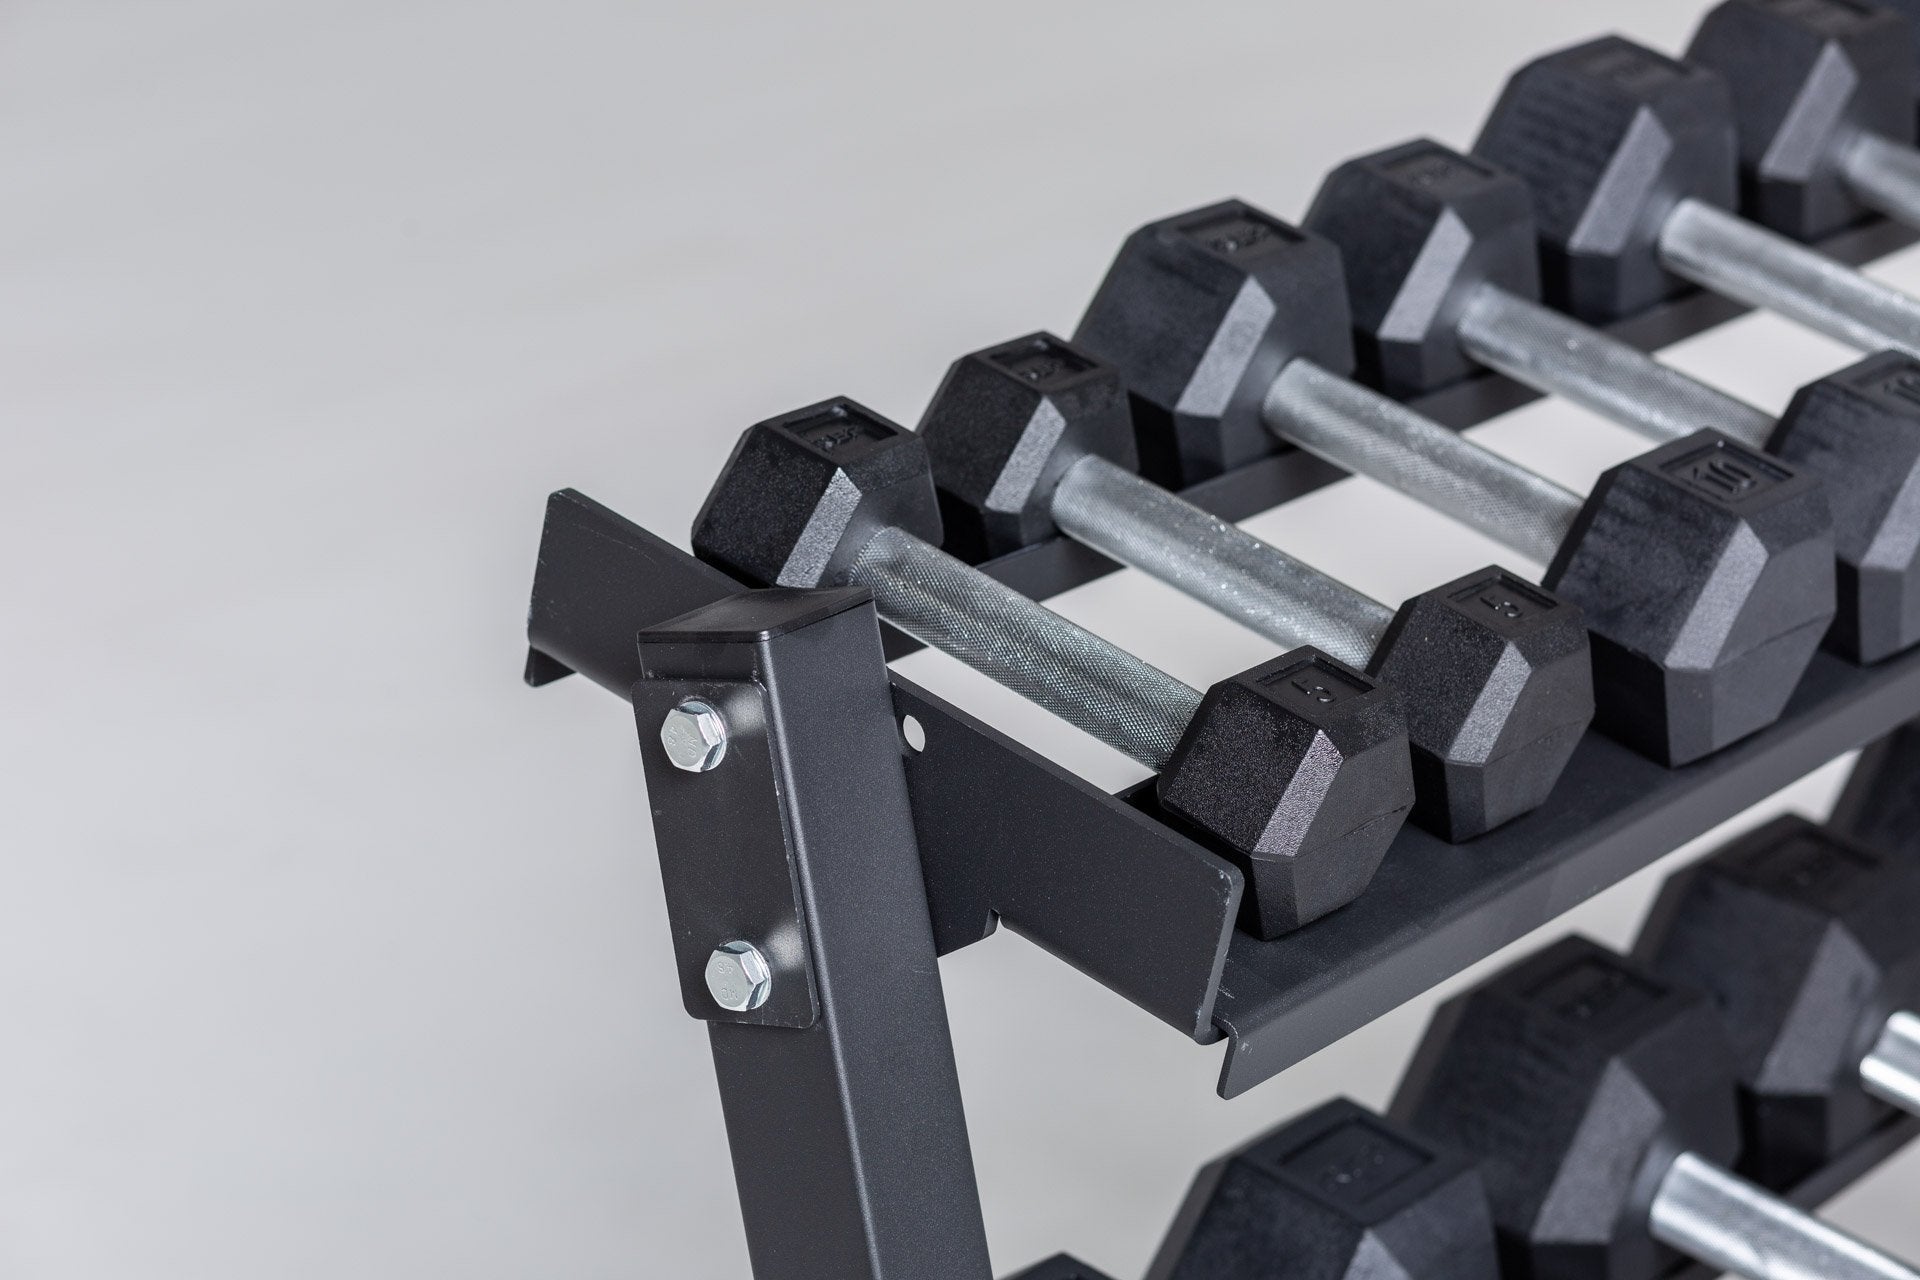 Close-up view of the 5 and 10lb pairs of a 5-50lb Hex Dumbbell Set being stored on the top shelf of a REP Dumbbell Rack.